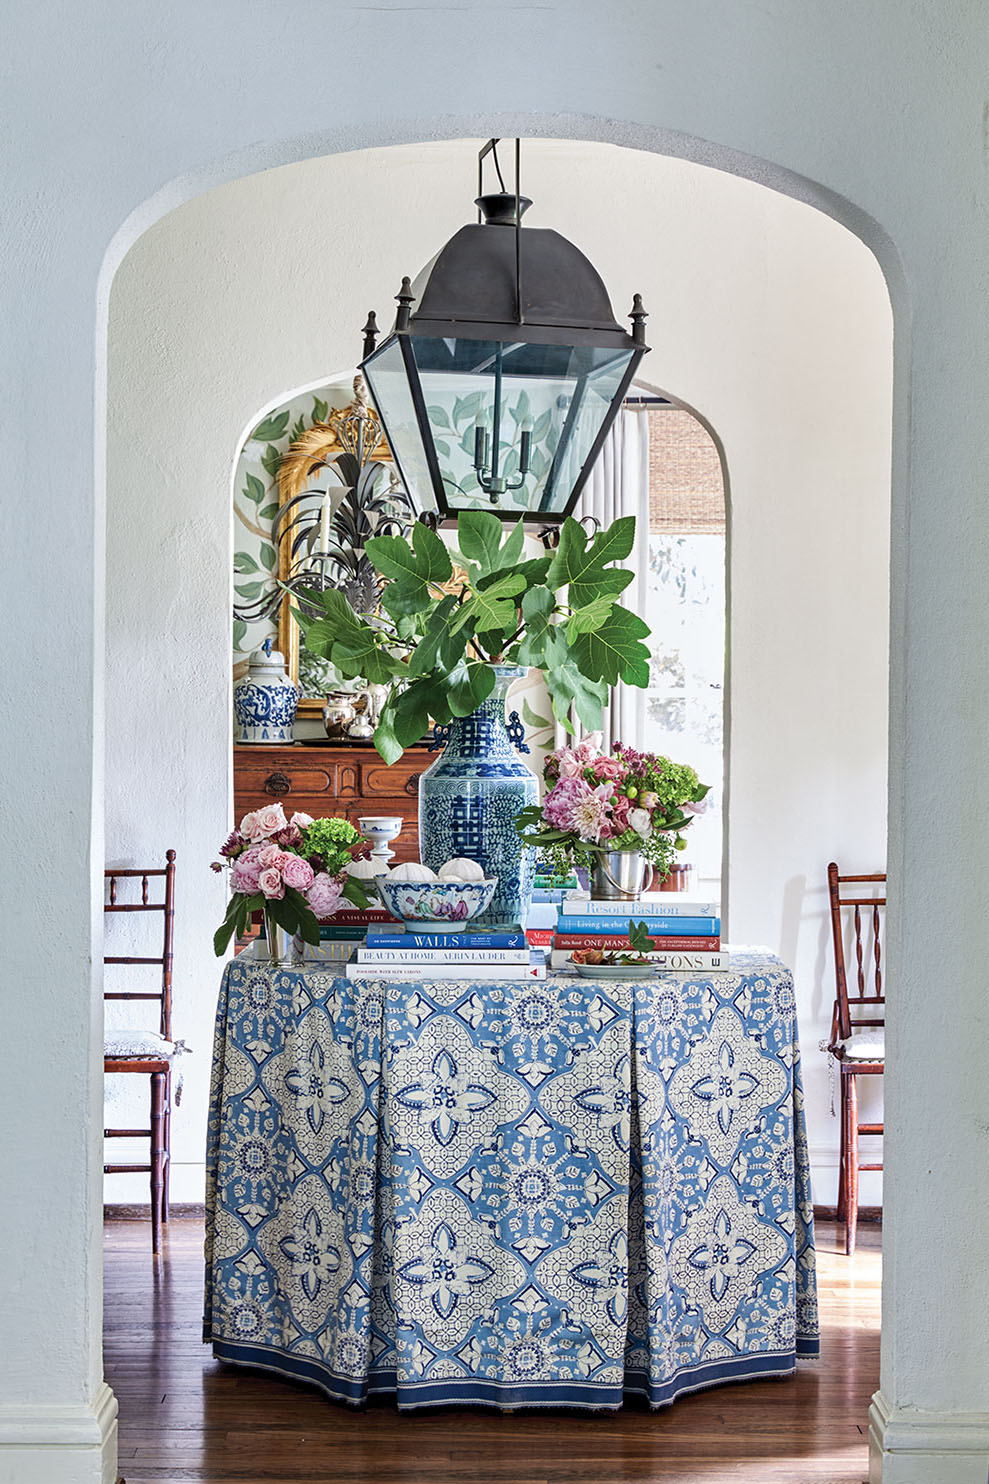 An octagonal table in an entry is topped with a tailored blue-and-white table skirt, blue-and-white pottery, books, and floral arrangements.